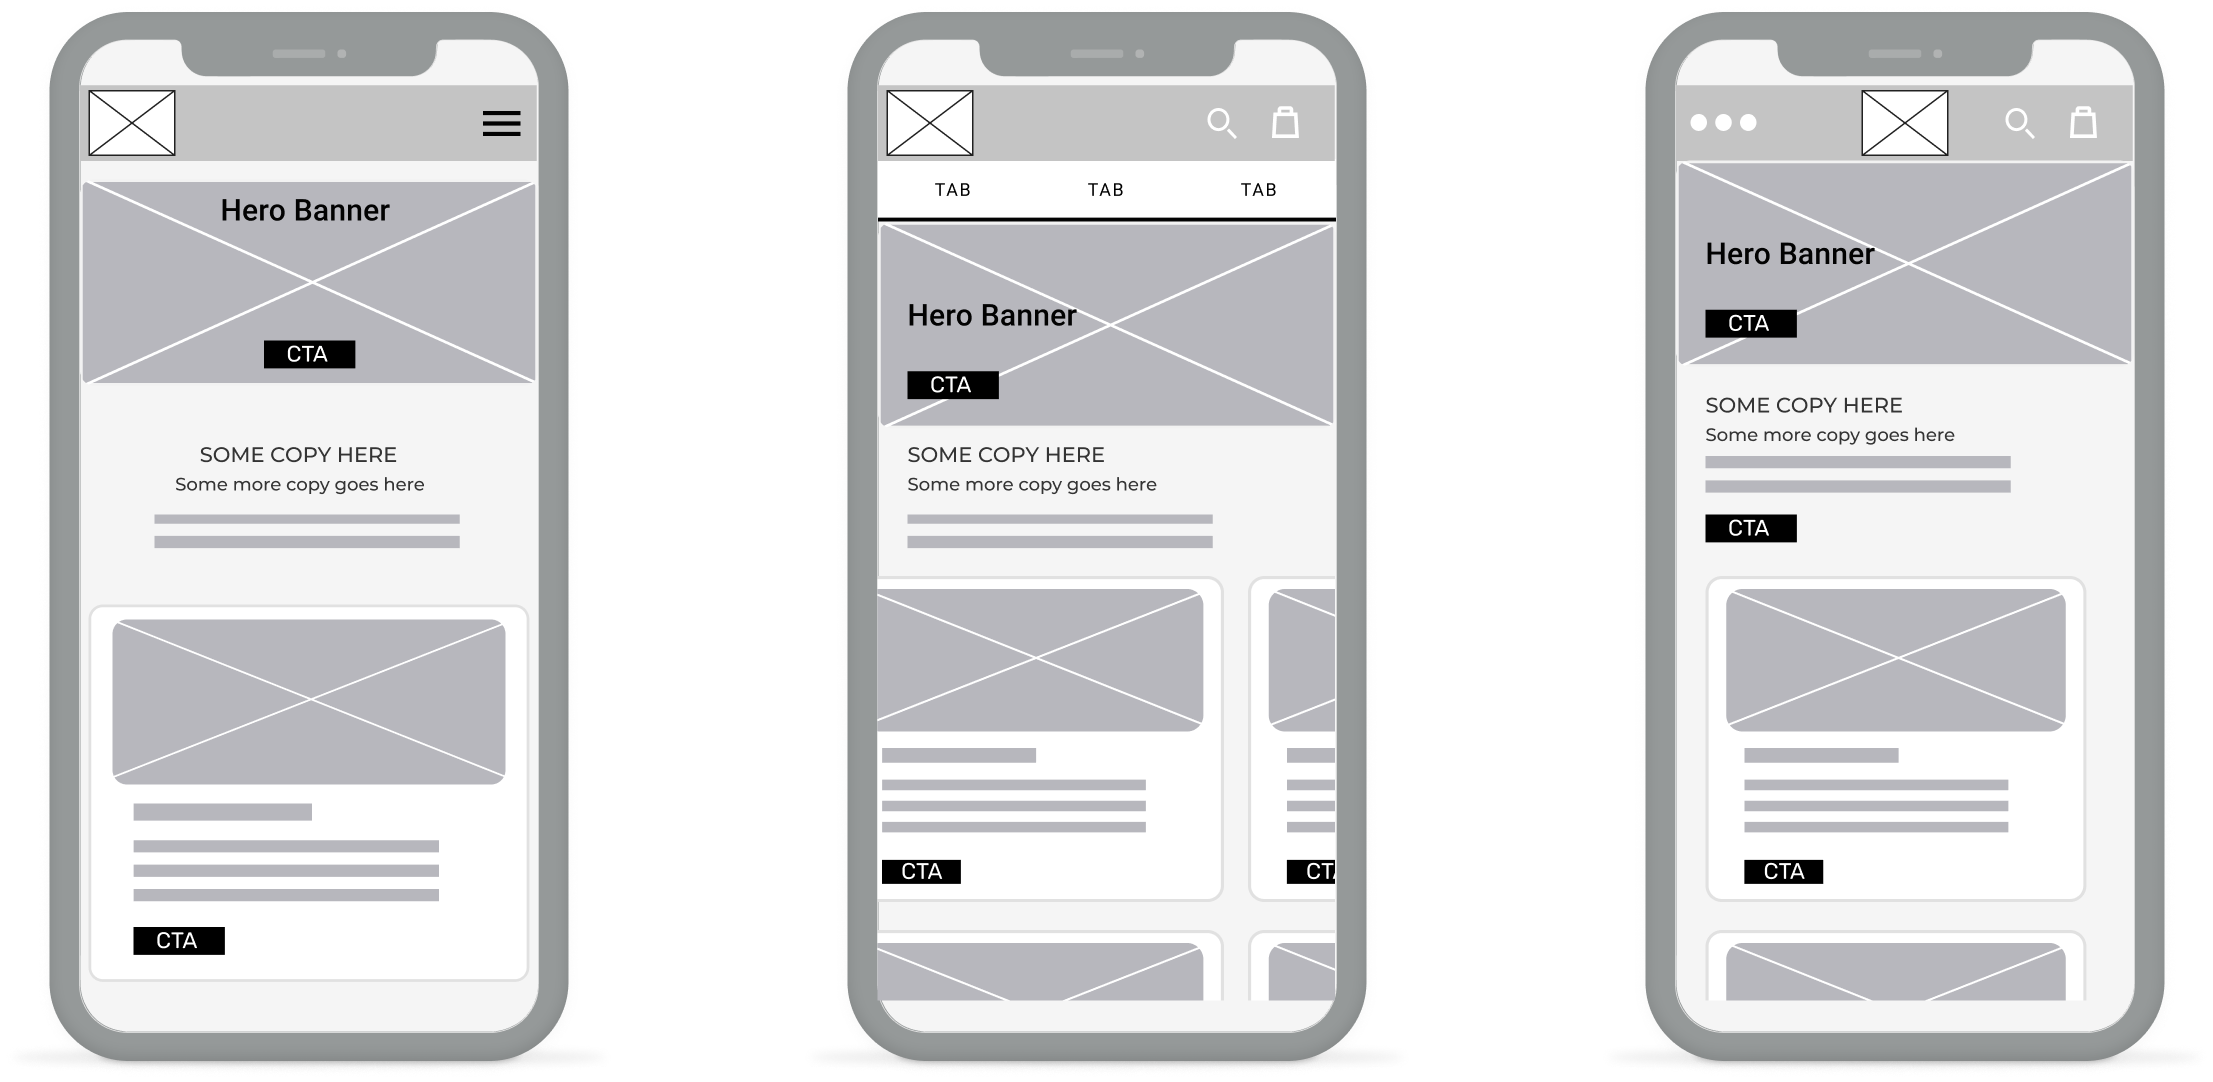  A basic wireframe image depicting the preliminary design of Dinair's mobile homepage. This low-fidelity representation outlines the foundational structure, layout, and key elements, providing a starting point for the user experience redesign process.